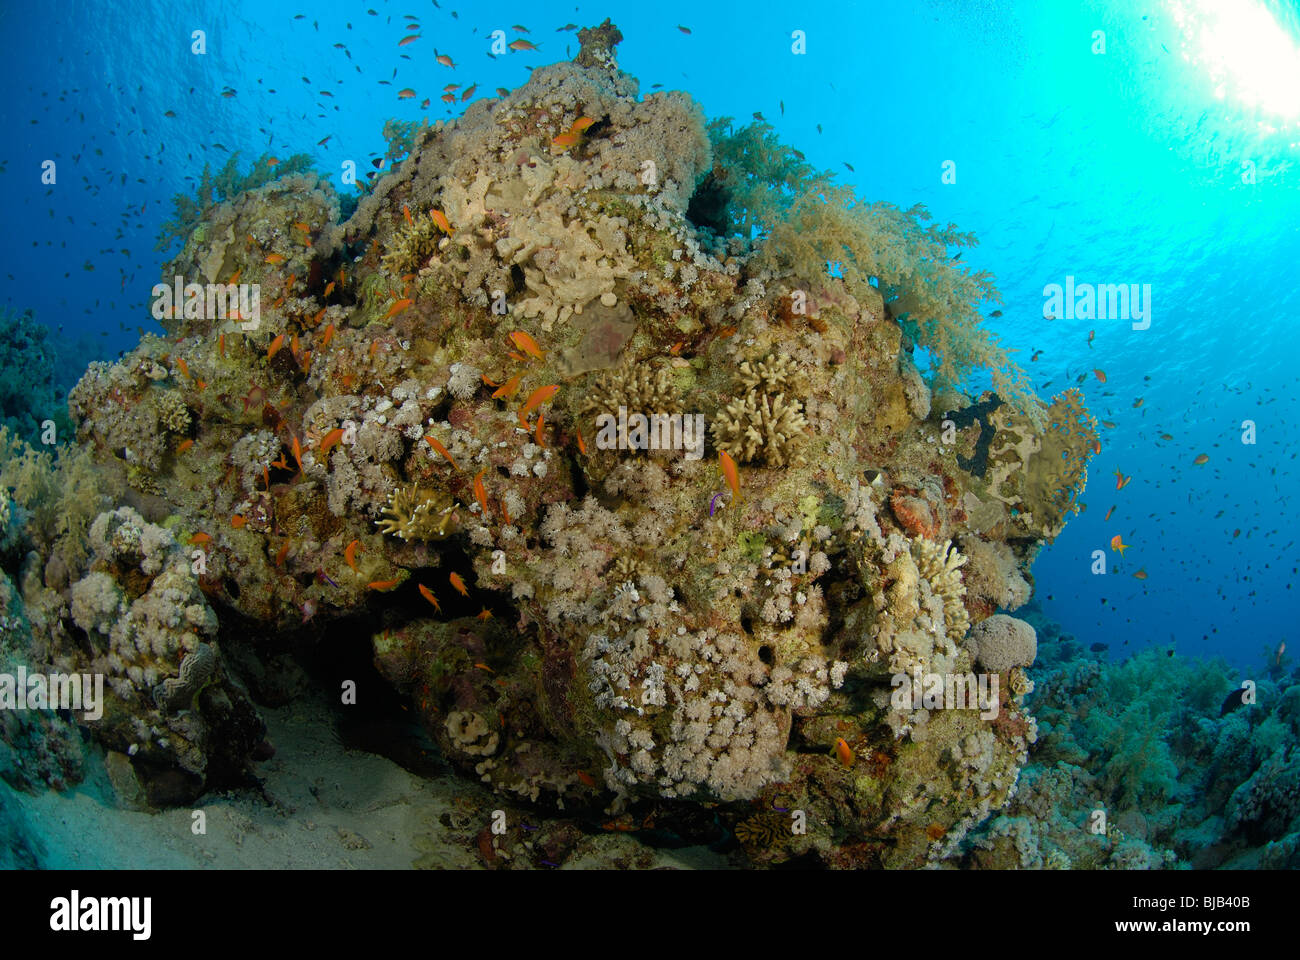 Head of coral reef in the Red Sea, off Hurghada, Egypt. Stock Photo